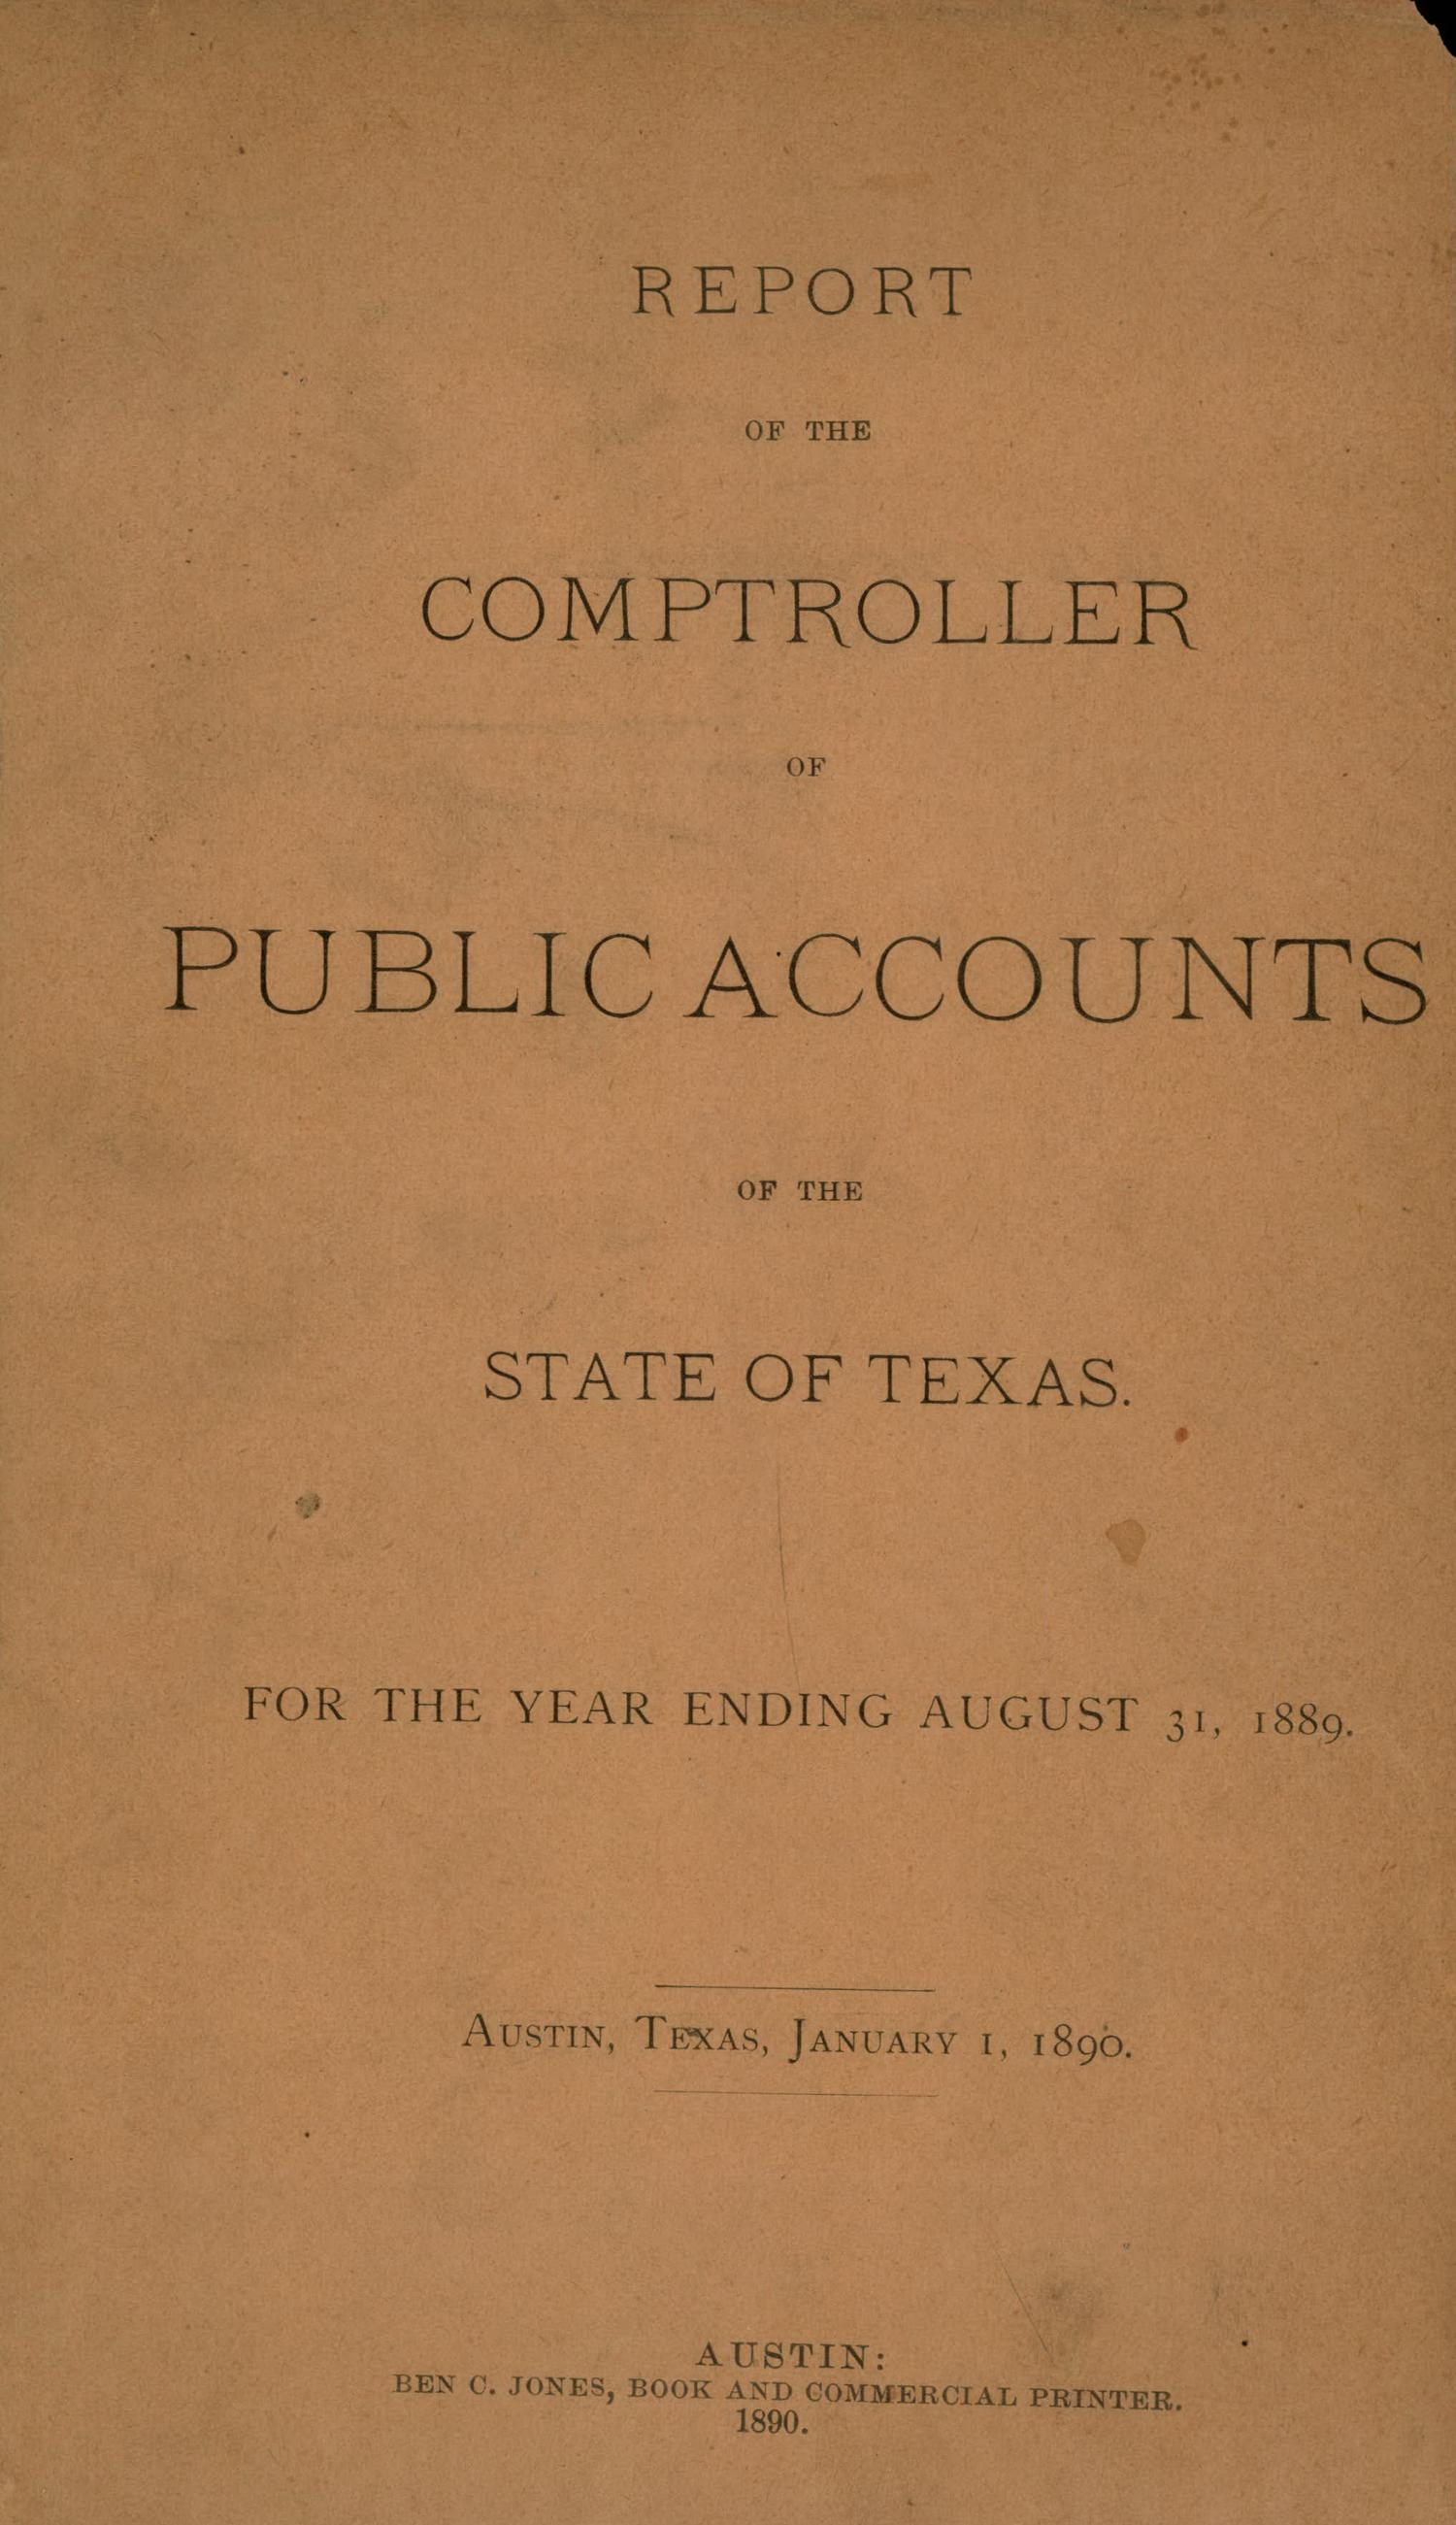 Report of the Comptroller of Public Accounts of the State of Texas: 1889
                                                
                                                    FRONT COVER
                                                